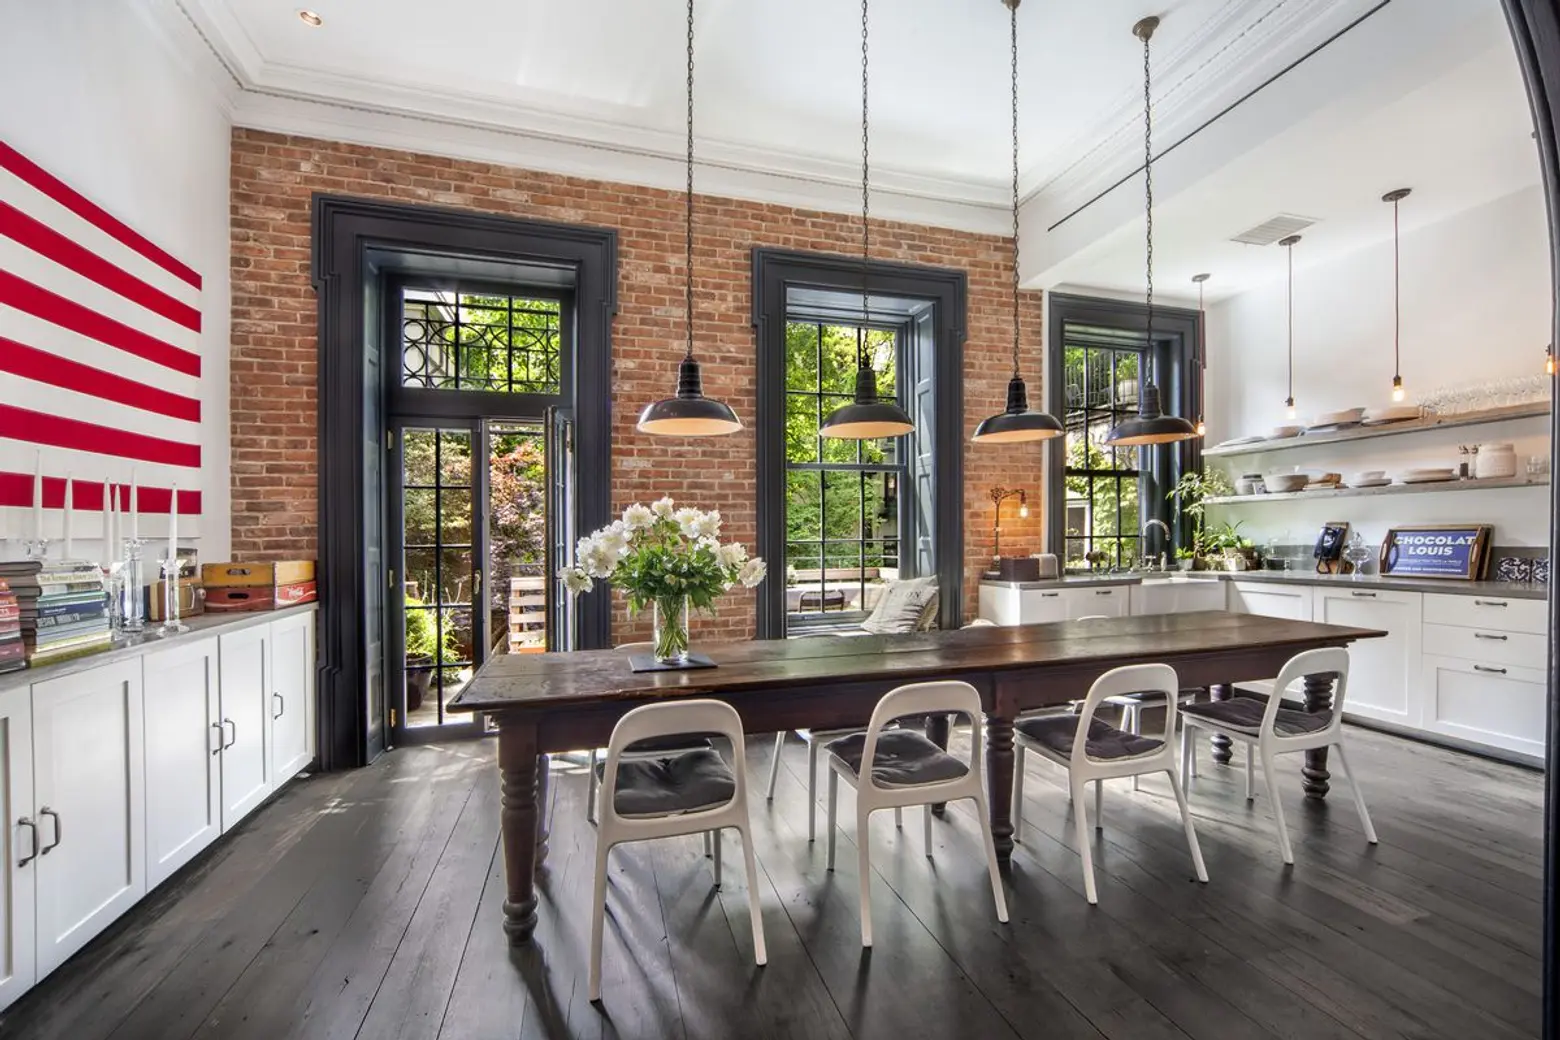 Stars and stripes highlight new-old-fashioned style in this $10.5M Brooklyn Heights brownstone